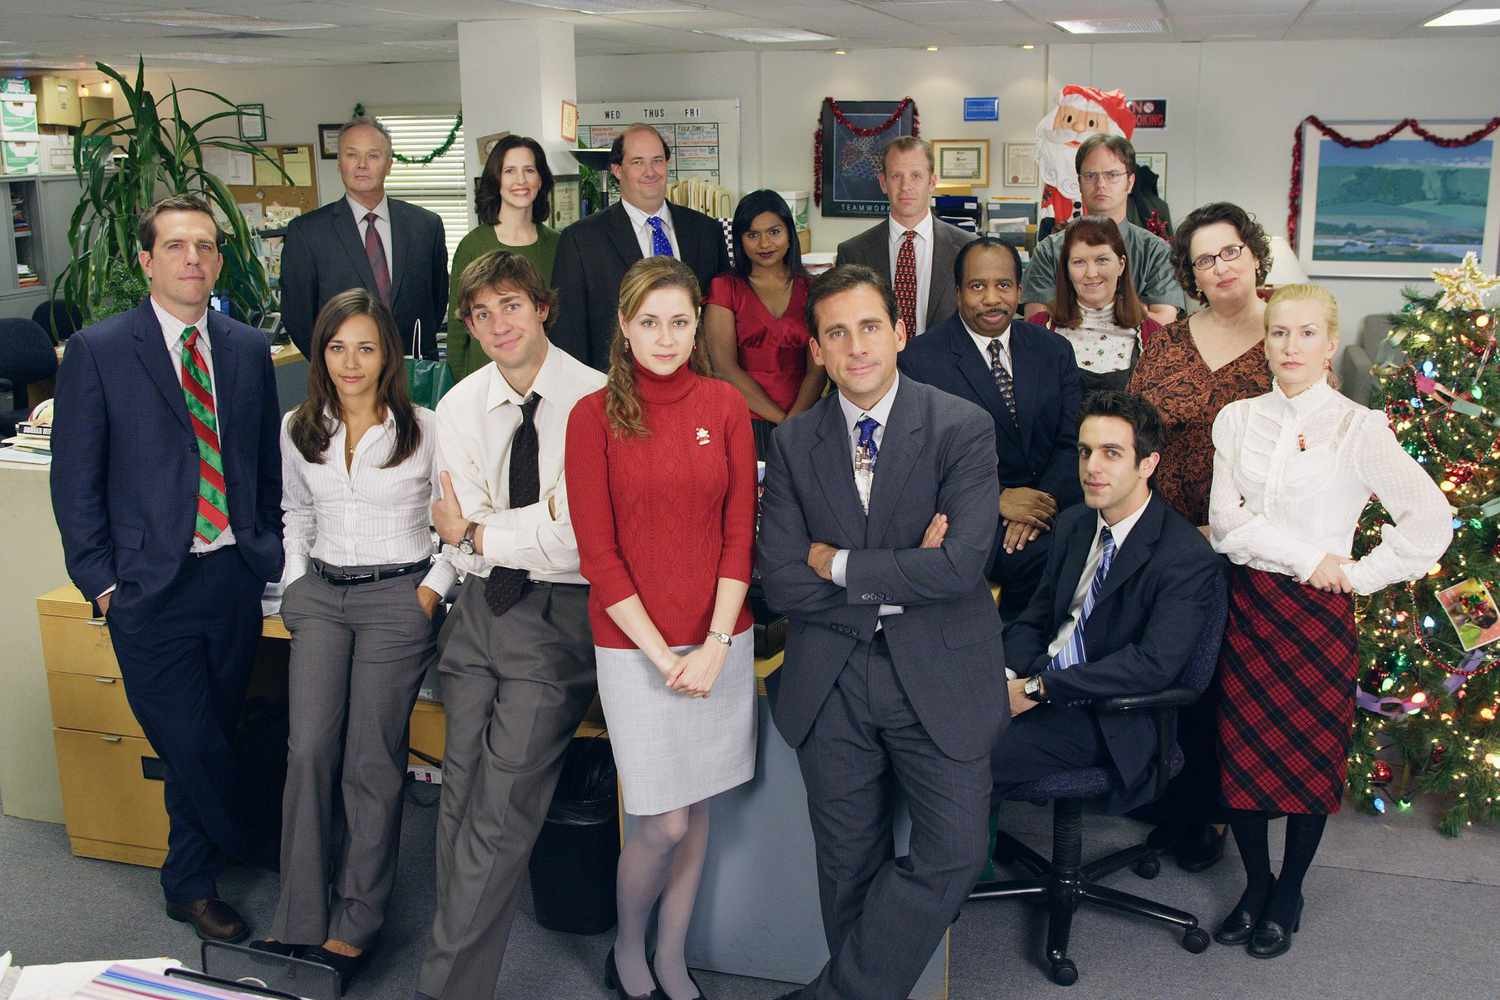 The cast of The Office 